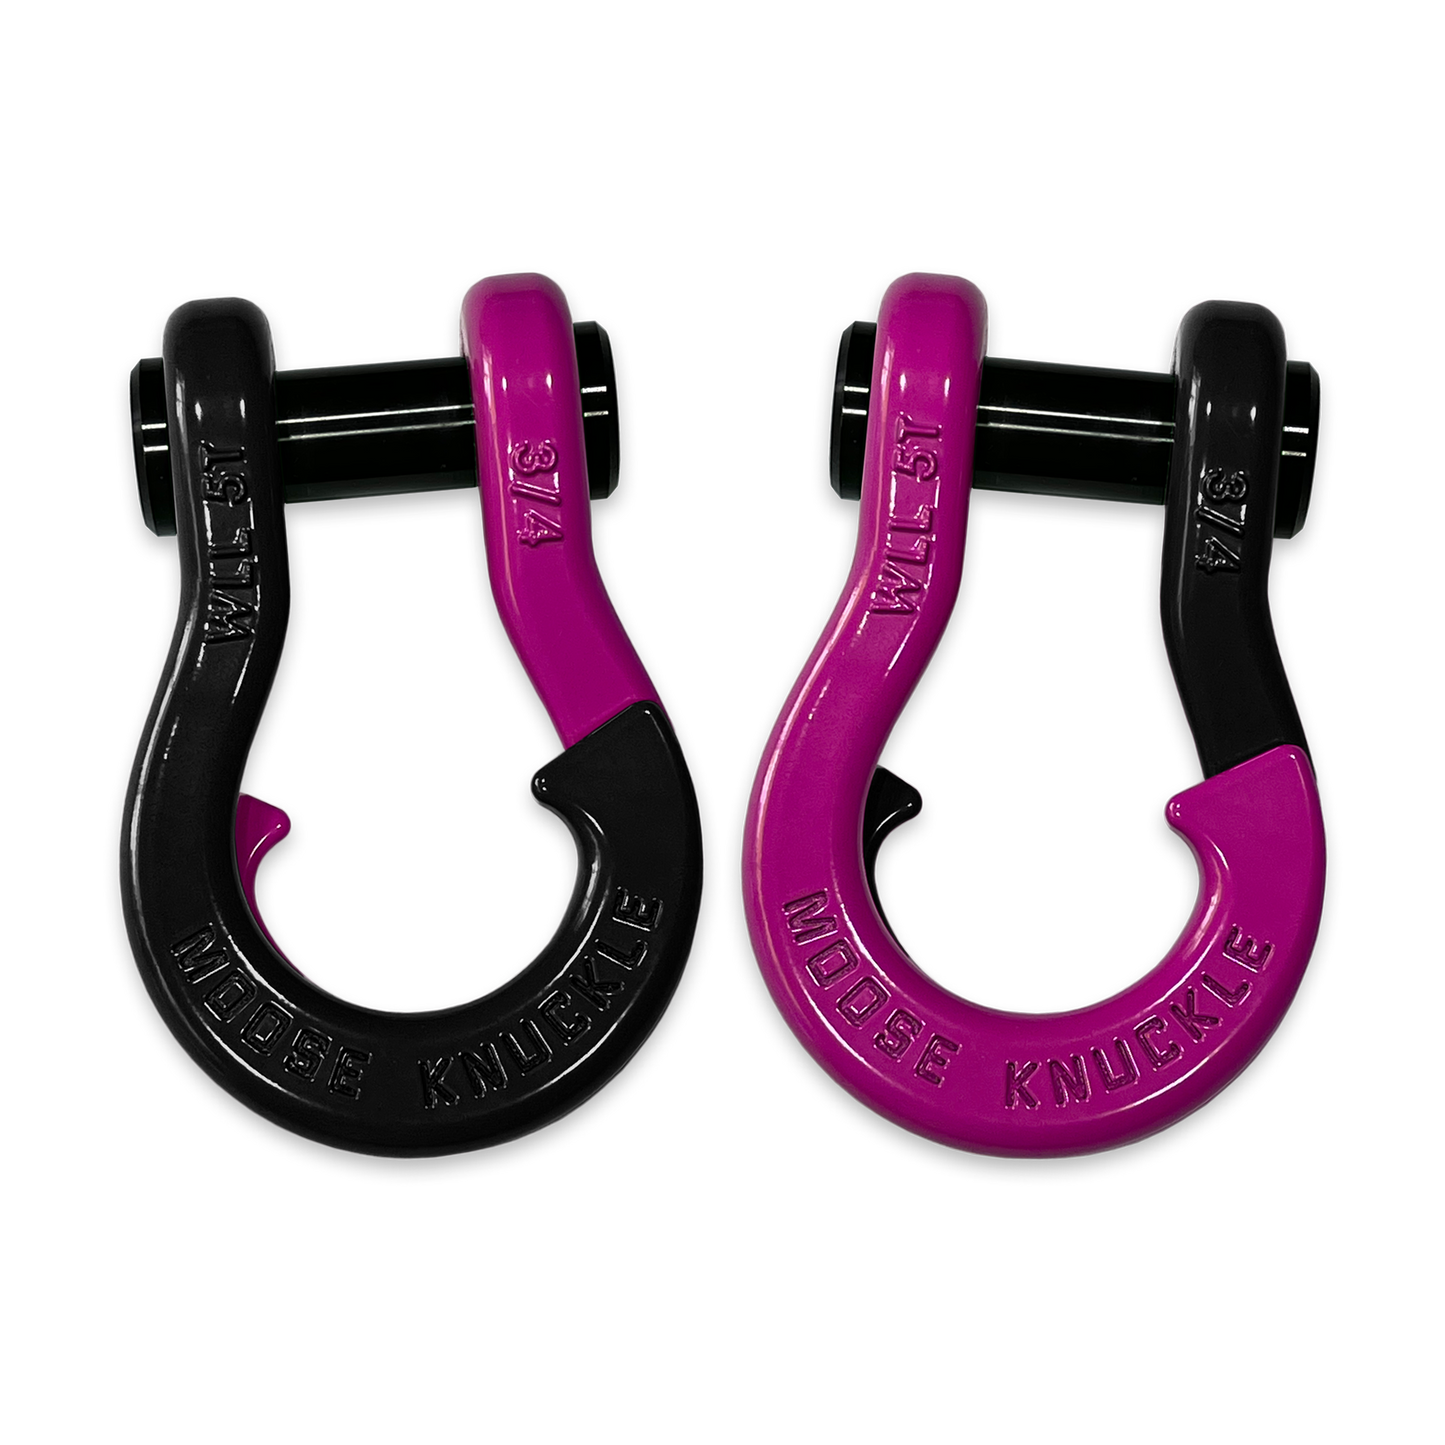 Moose Knuckle's Jowl Recovery Split Shackle 3/4 in Black Hole and Pogo Pink Combo